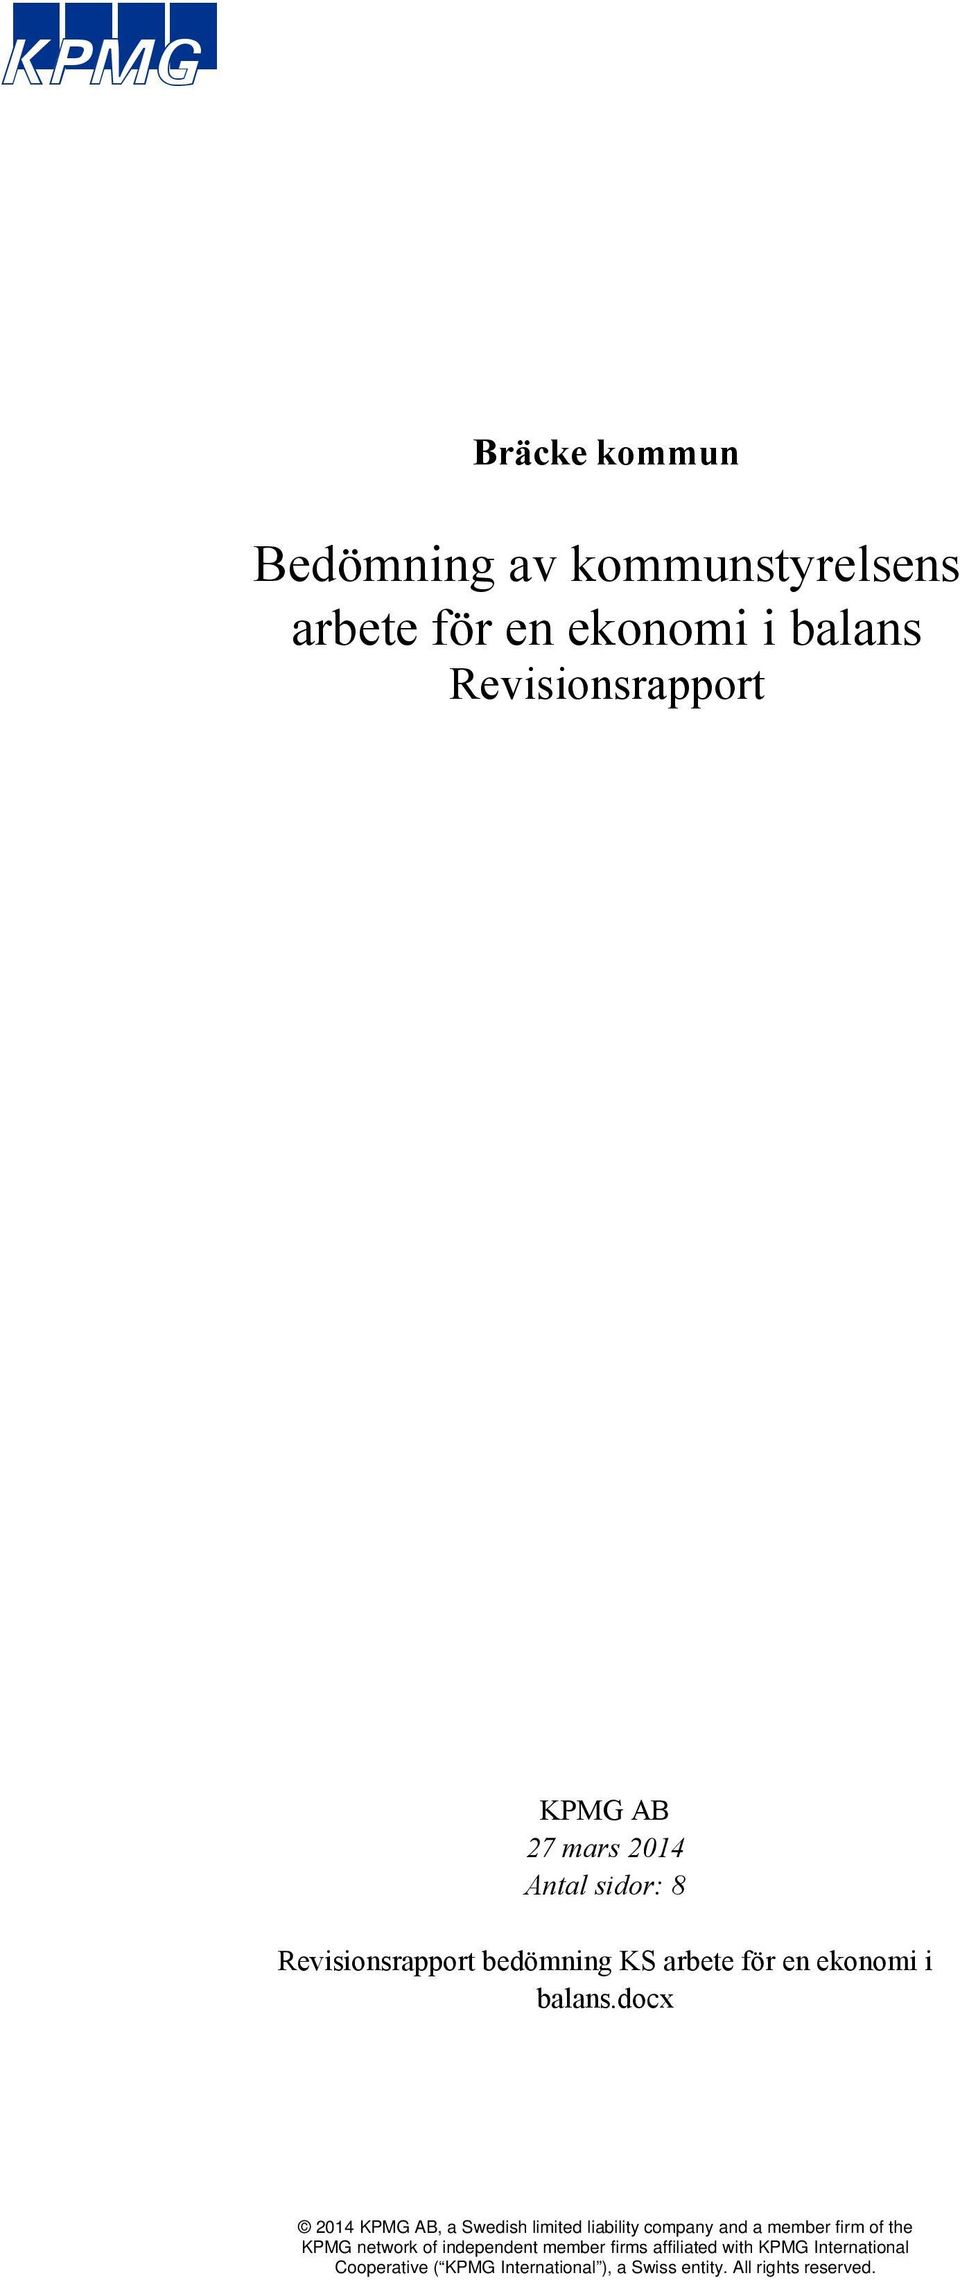 014 Antal sidor: 8 Revisionsrapport